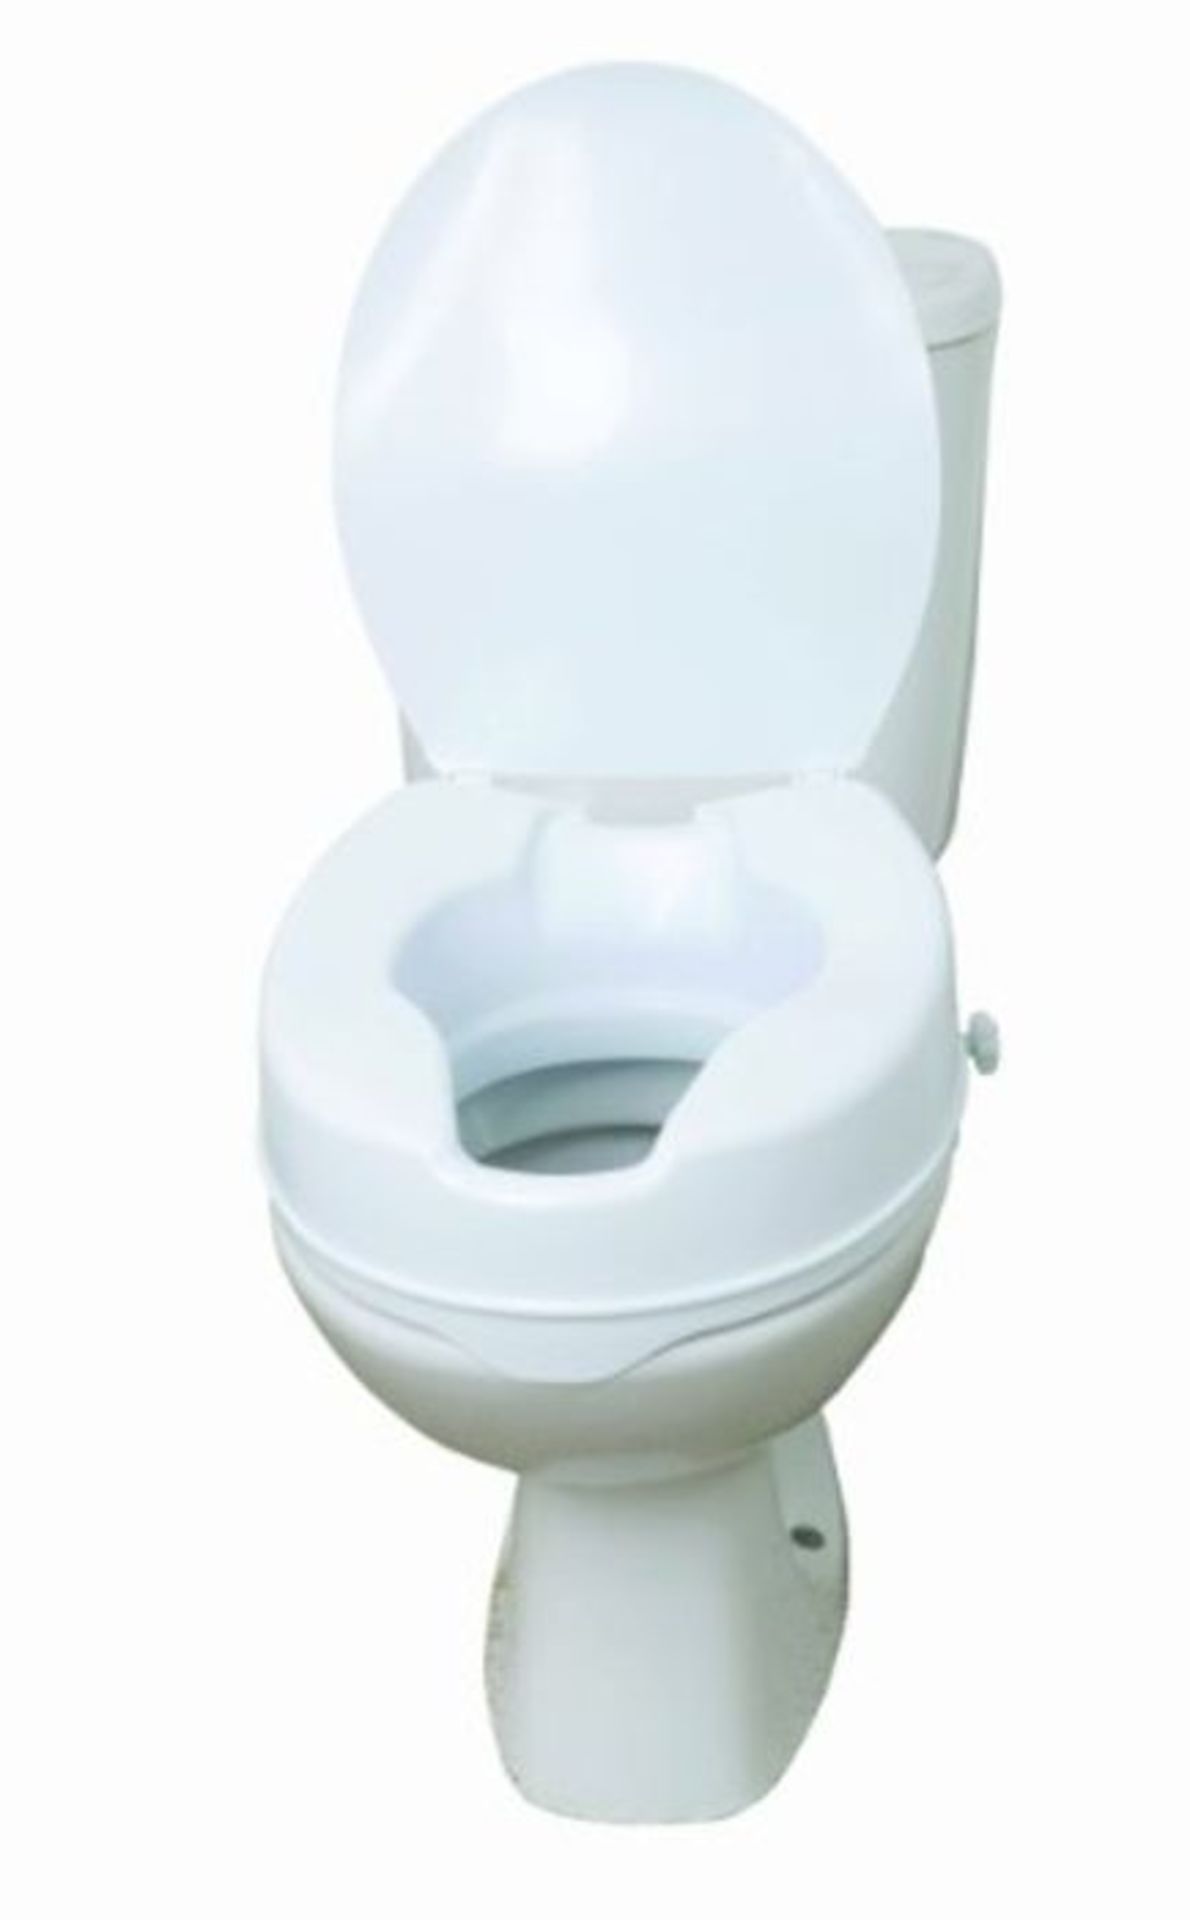 Drive 6 Inch Raised Toilet Seat with Lid